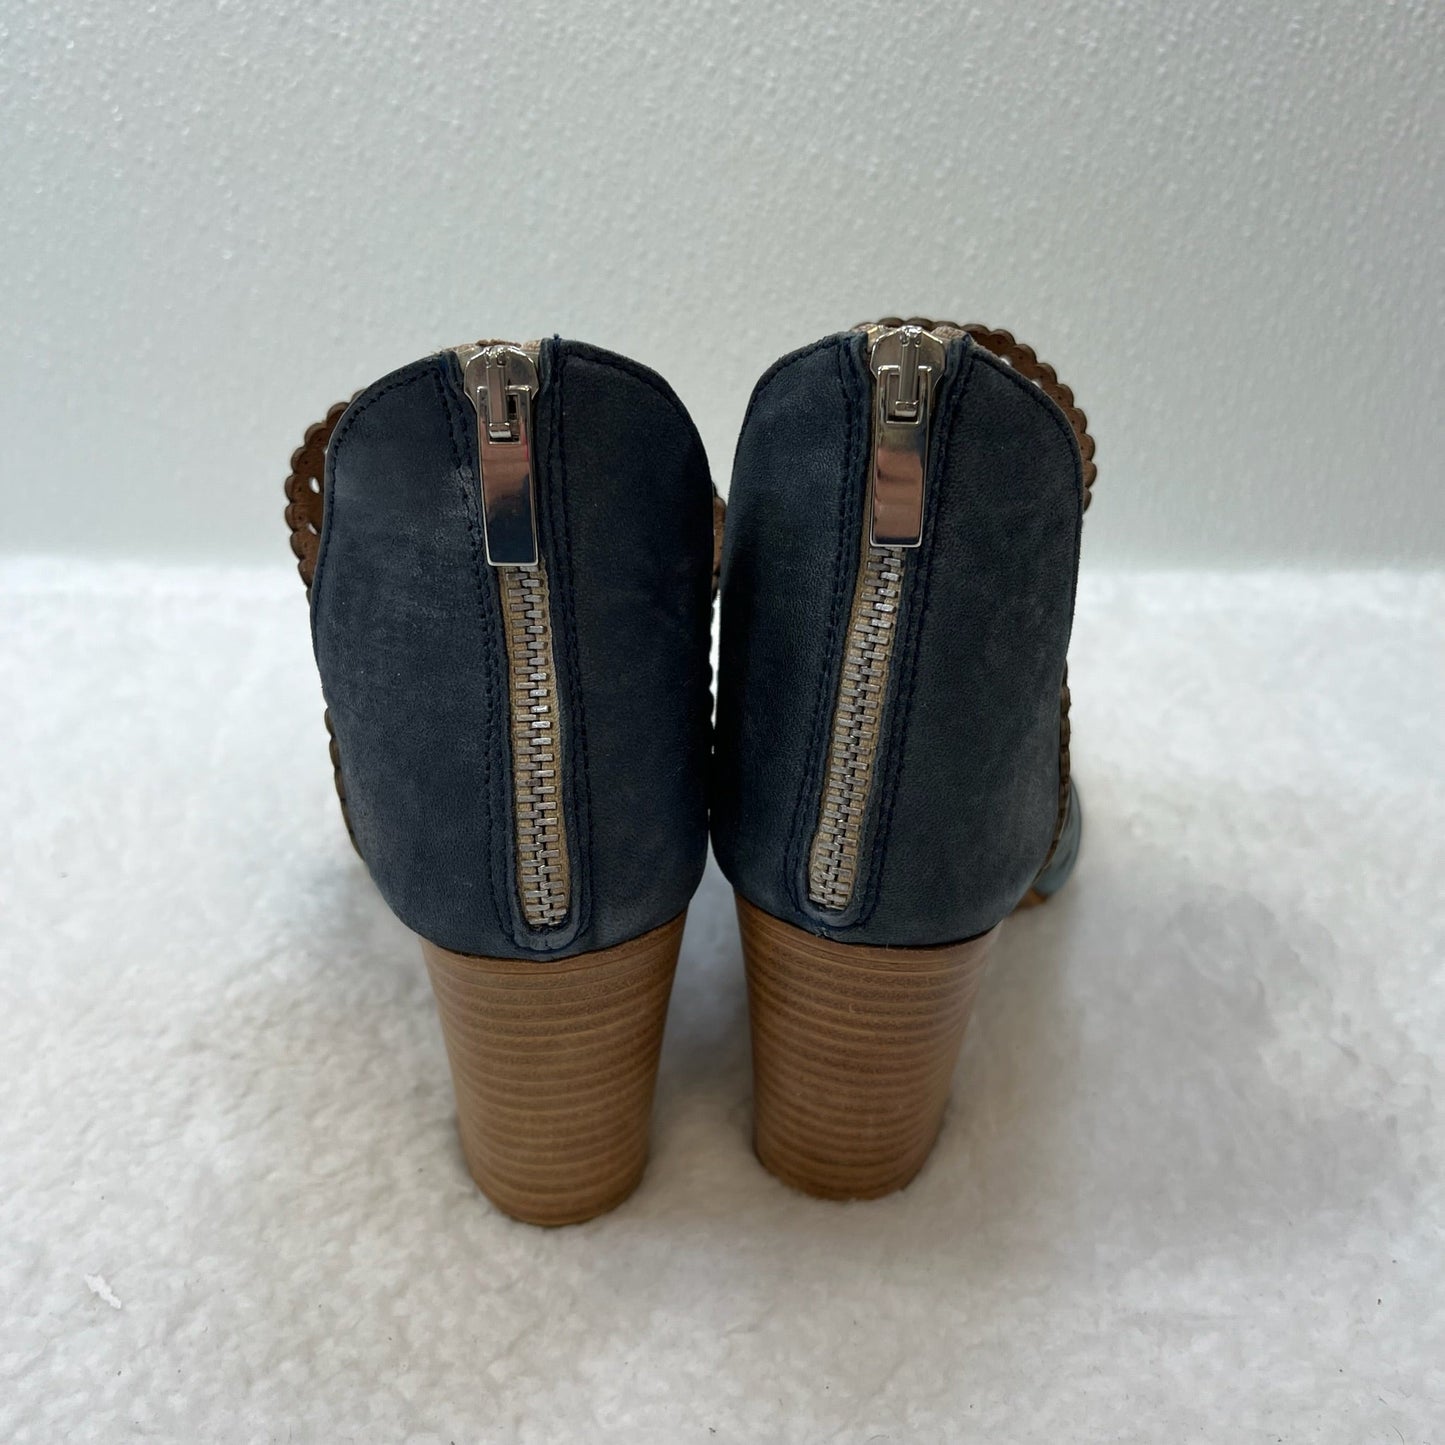 Blue Sandals Heels Block BY RON WHITE size 37